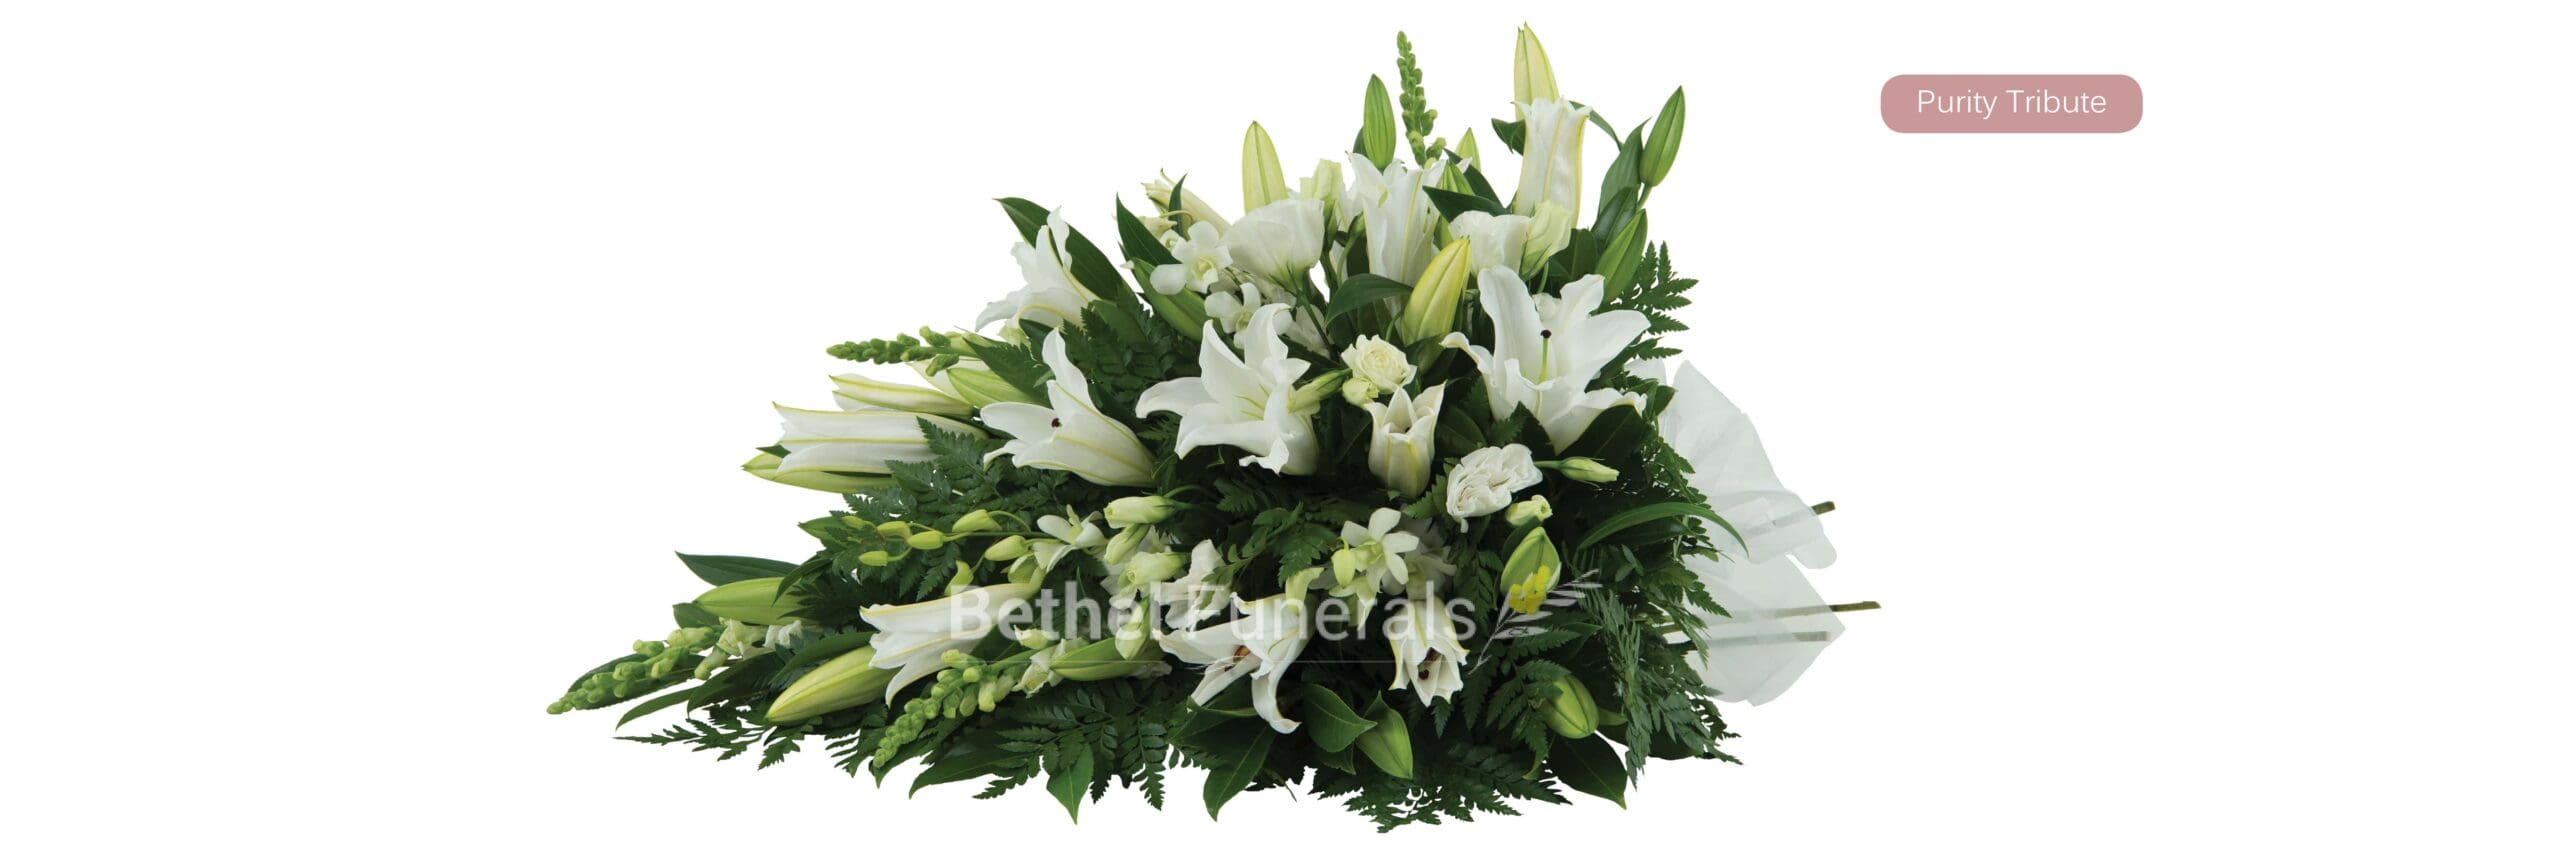 Purity Tribute Funeral Flowers